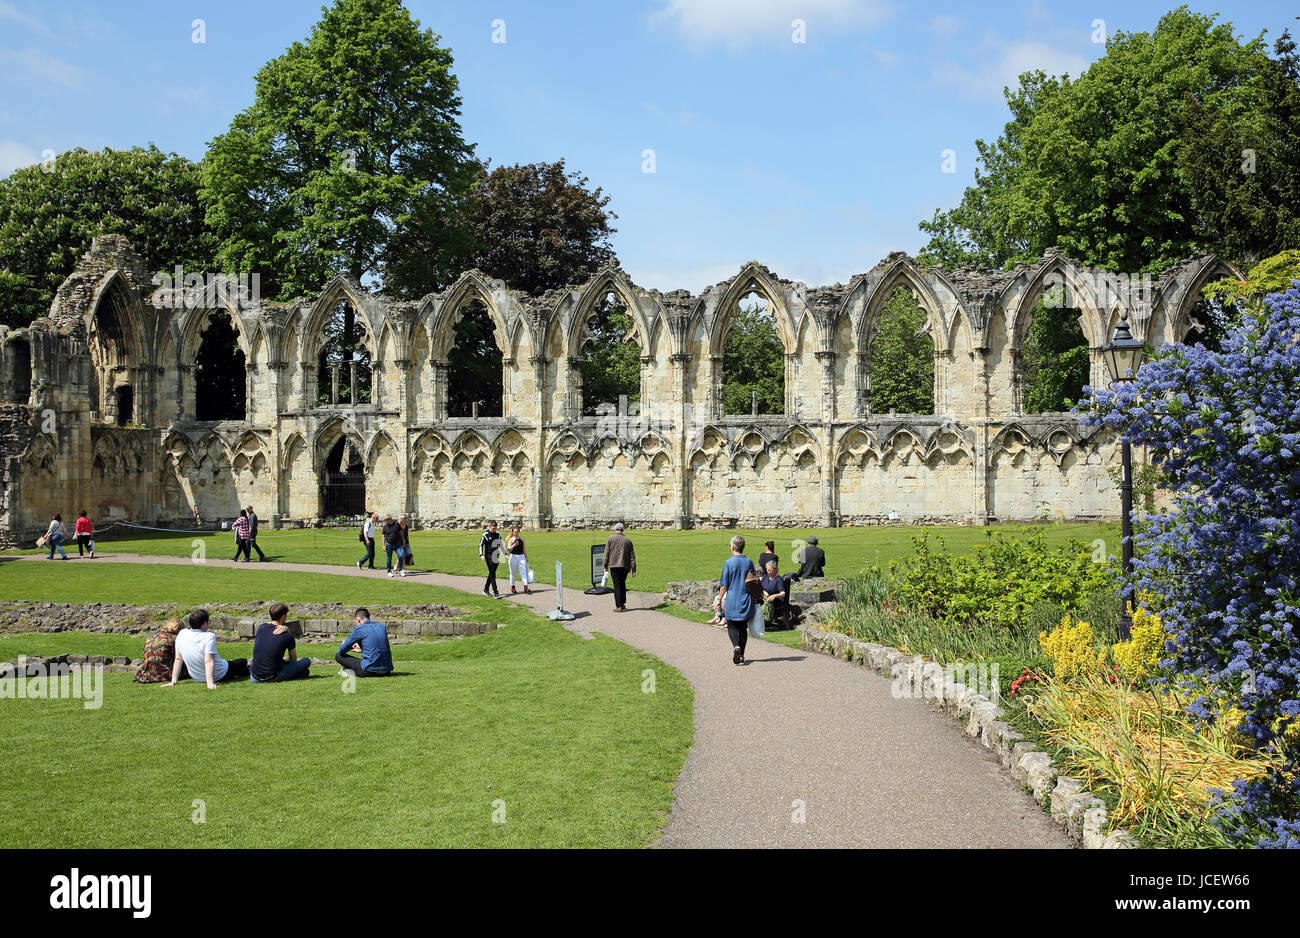 The ruins of St. Mary's Abbey in York, England, UK, with holiday makers in the foreground enjoying the sunshine. Stock Photo